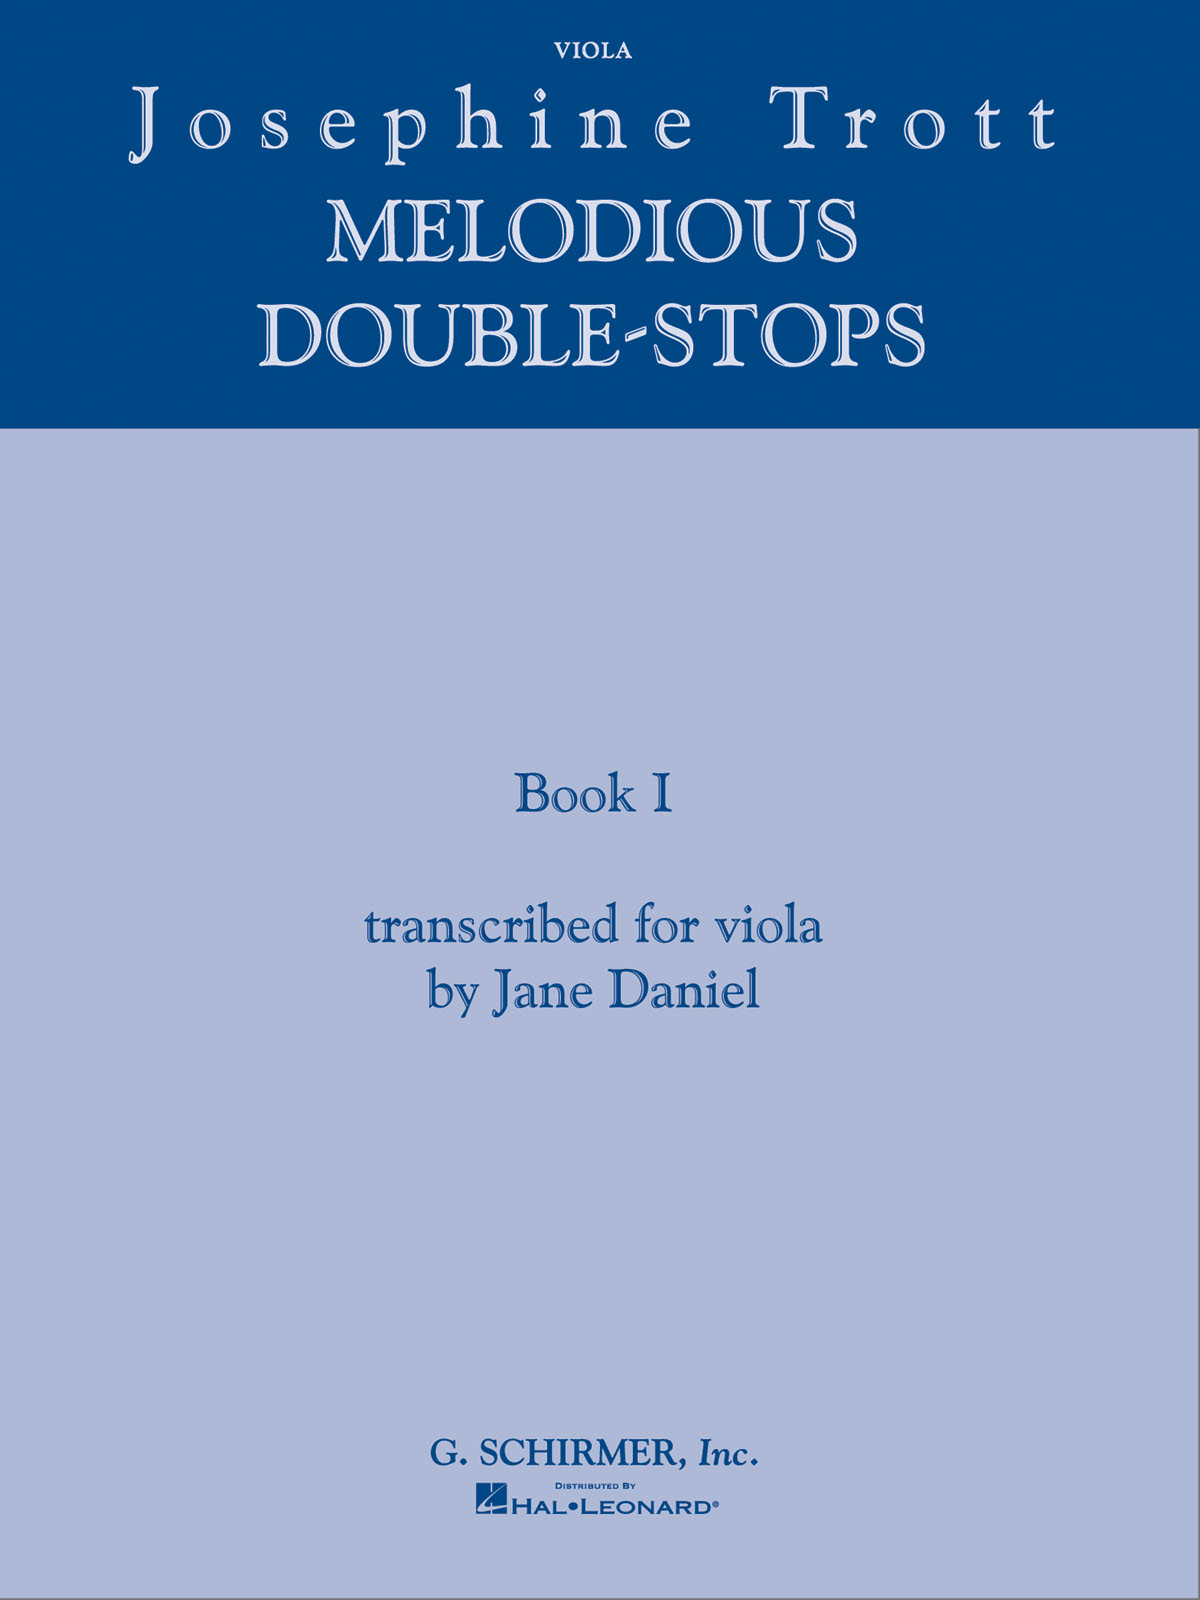 Josephine Trott - Melodious Double-Stops Book 1 - transcribed for viola by Jane Daniel - pro violu